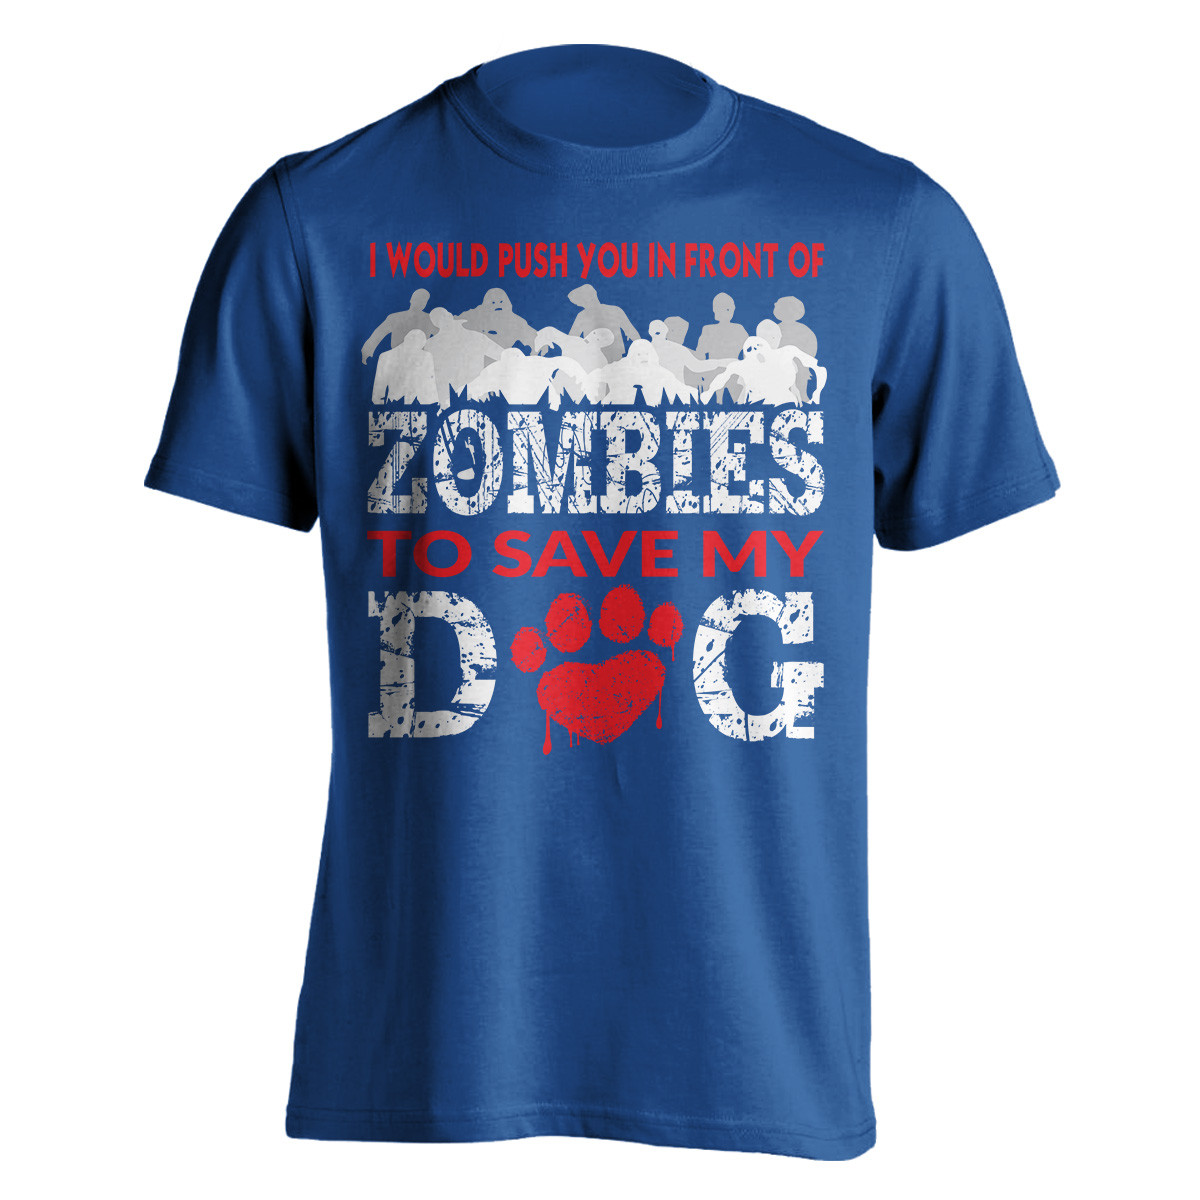 "I Would Push You In Front Of Zombies" Dog T-Shirt